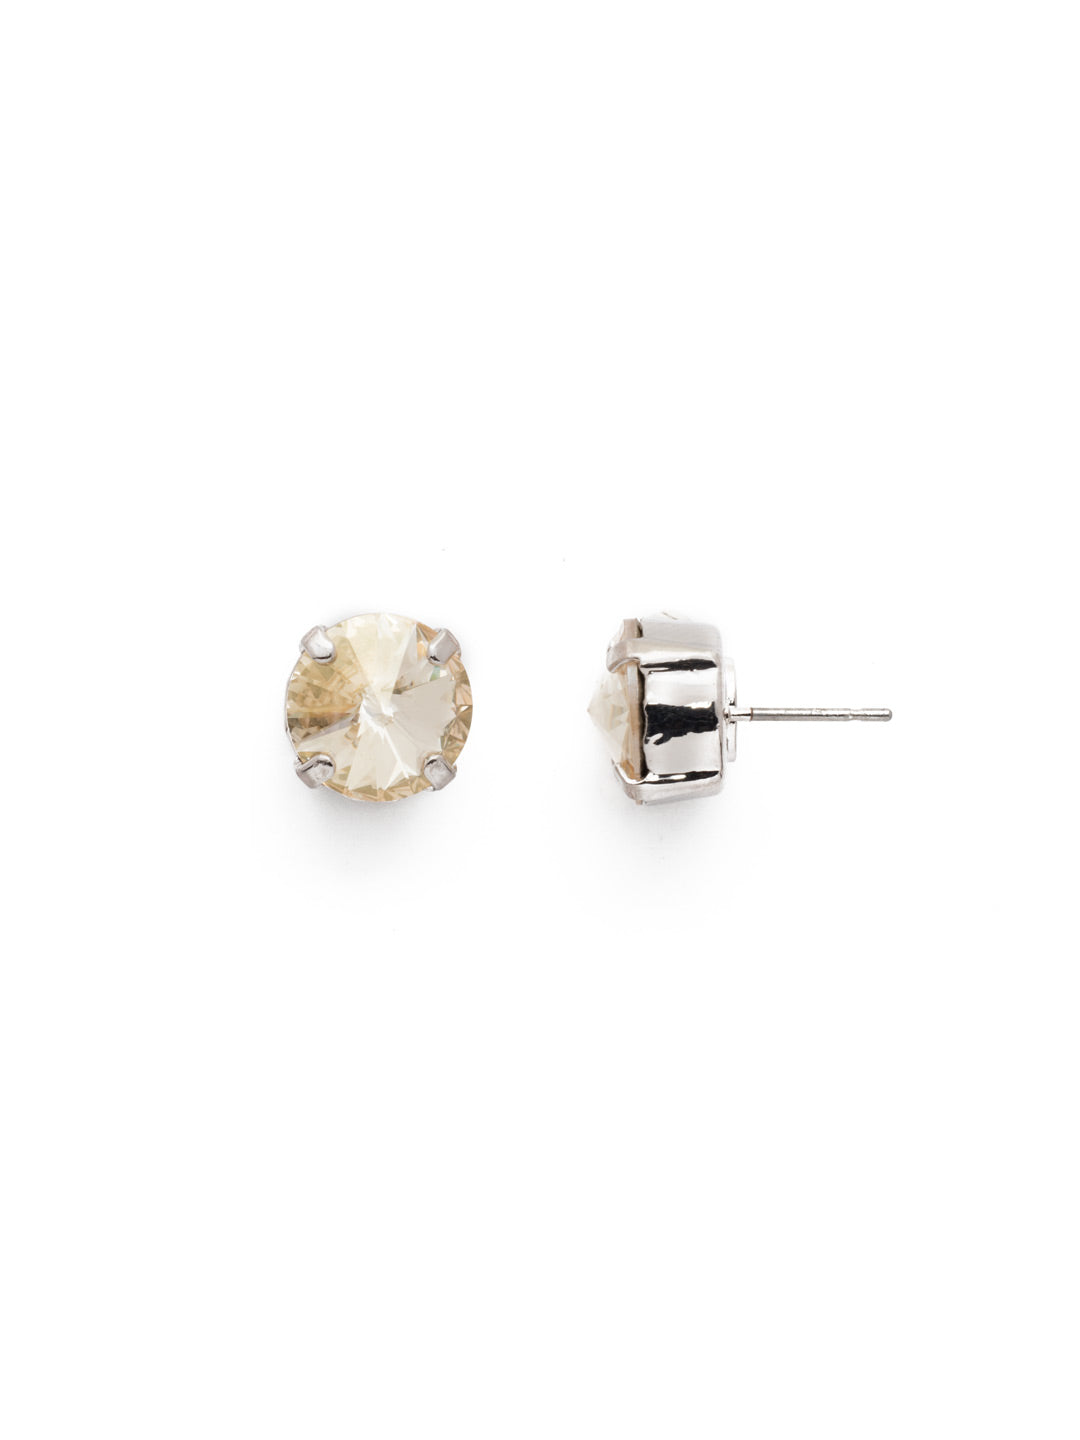 London Stud Earrings - ECM14RHCCH - <p>Everyone needs a great pair of studs. Add some classic sparkle to any occasion with these stud earrings. From Sorrelli's Crystal Champagne collection in our Palladium Silver-tone finish.</p>